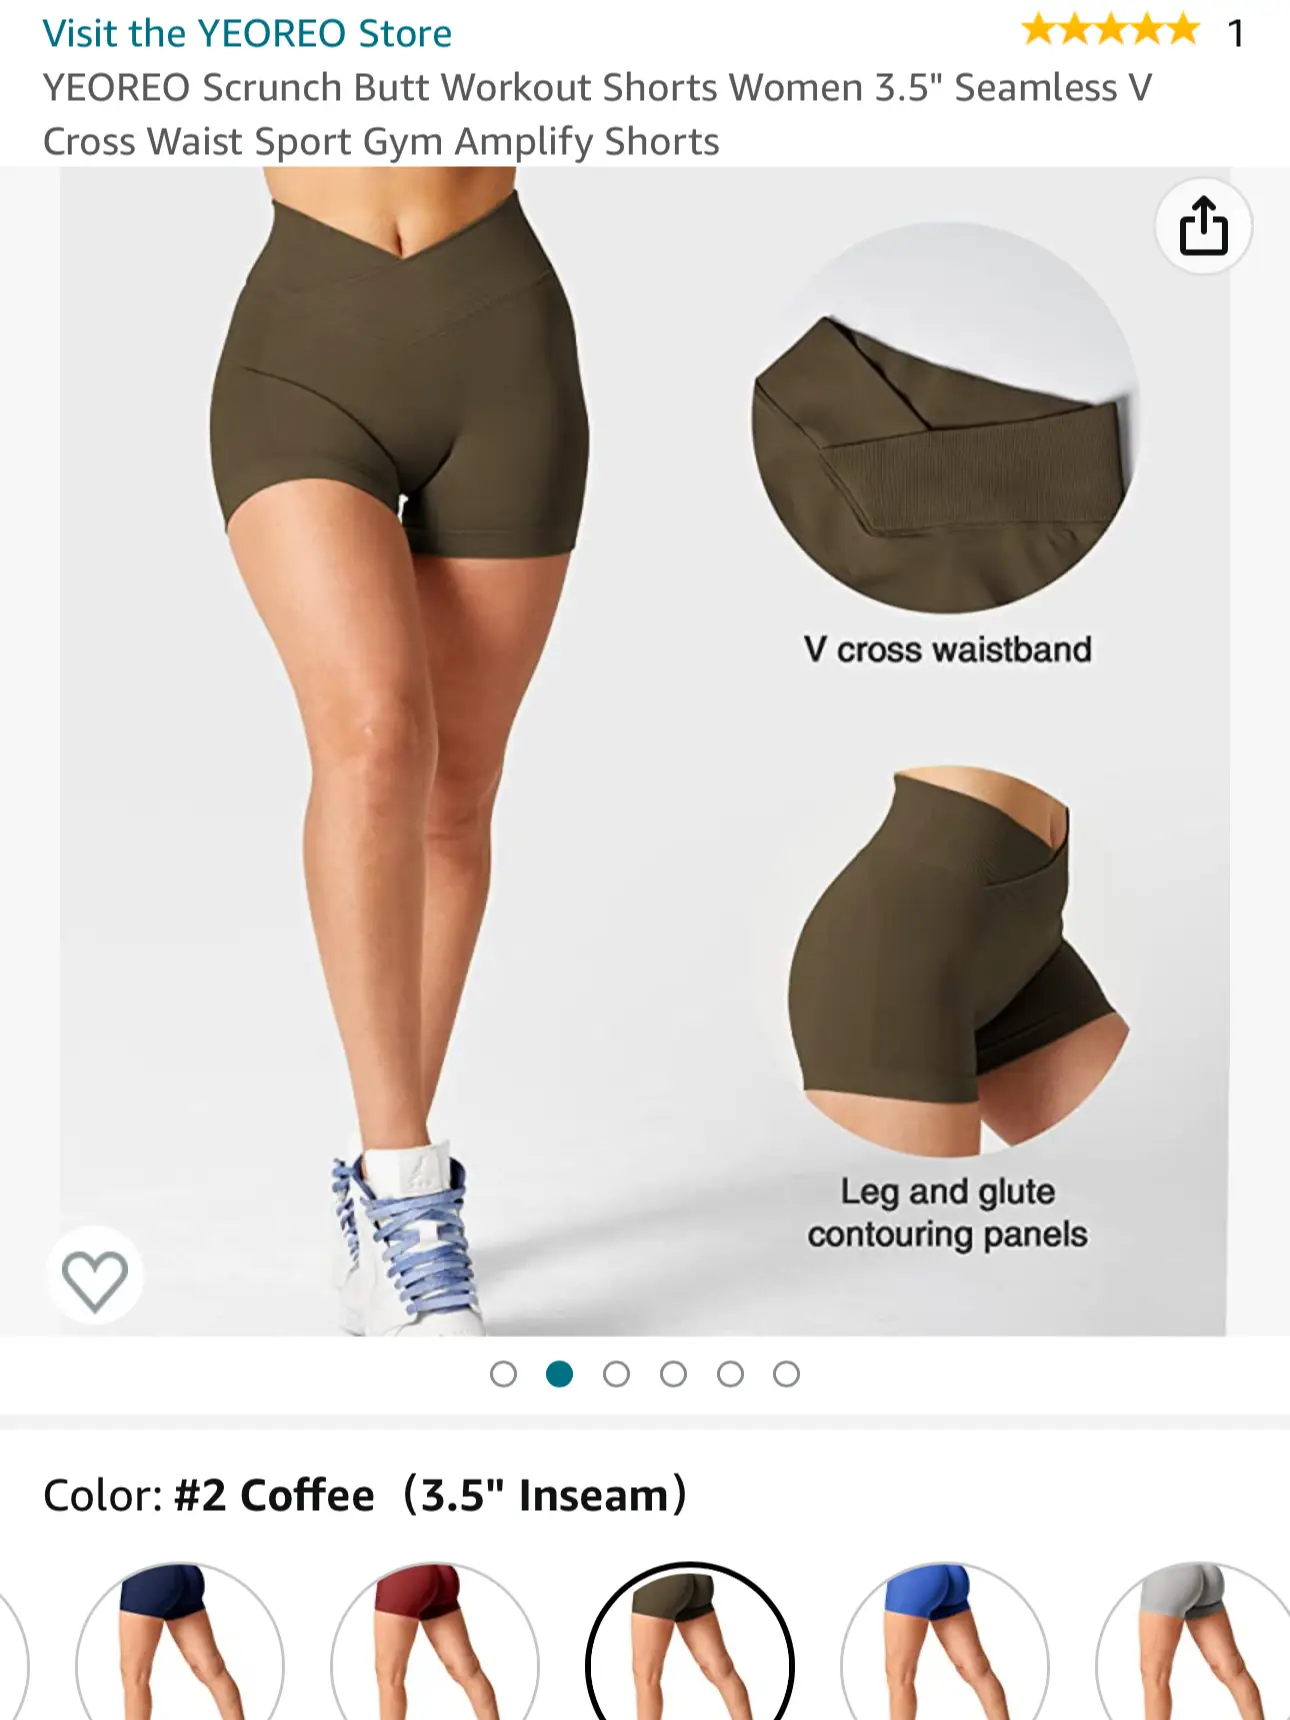 CELER sportswear review and wow lets just say these are super flatter